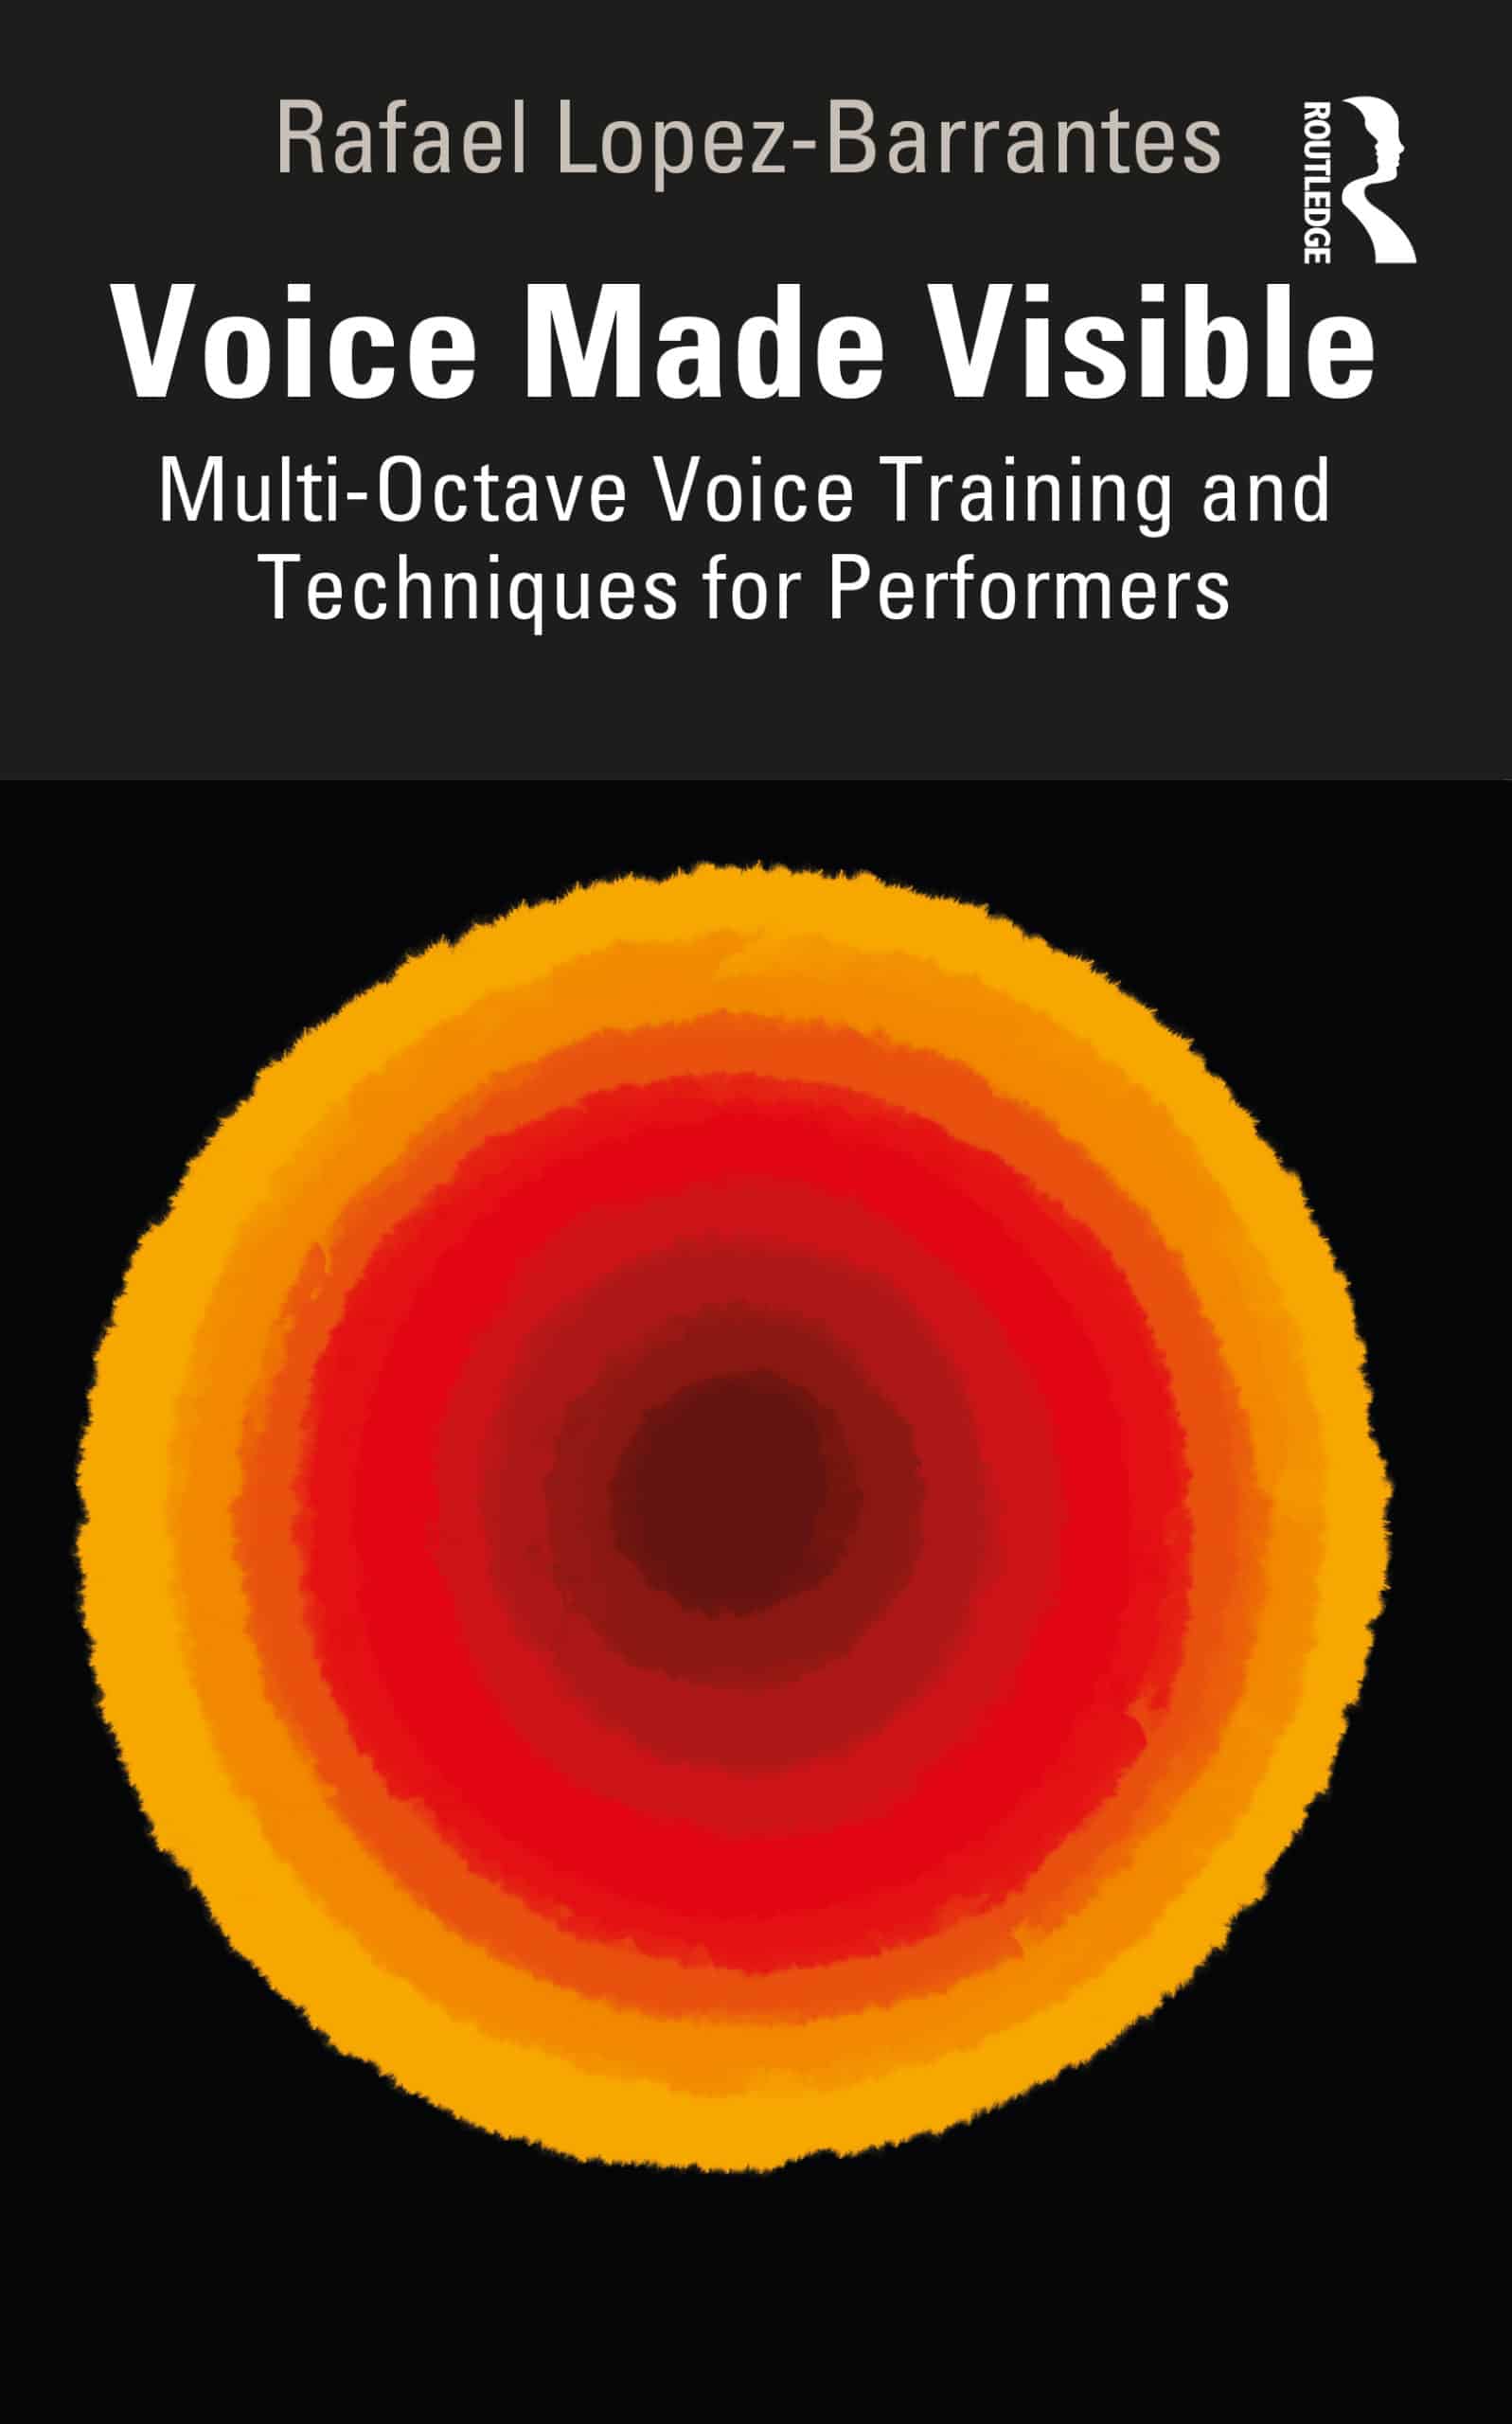 Book cover of red and yellow concentric circles on black background and title 'Voice Made Visible: Multi-Octave Voice Training and Techniques for Performers'